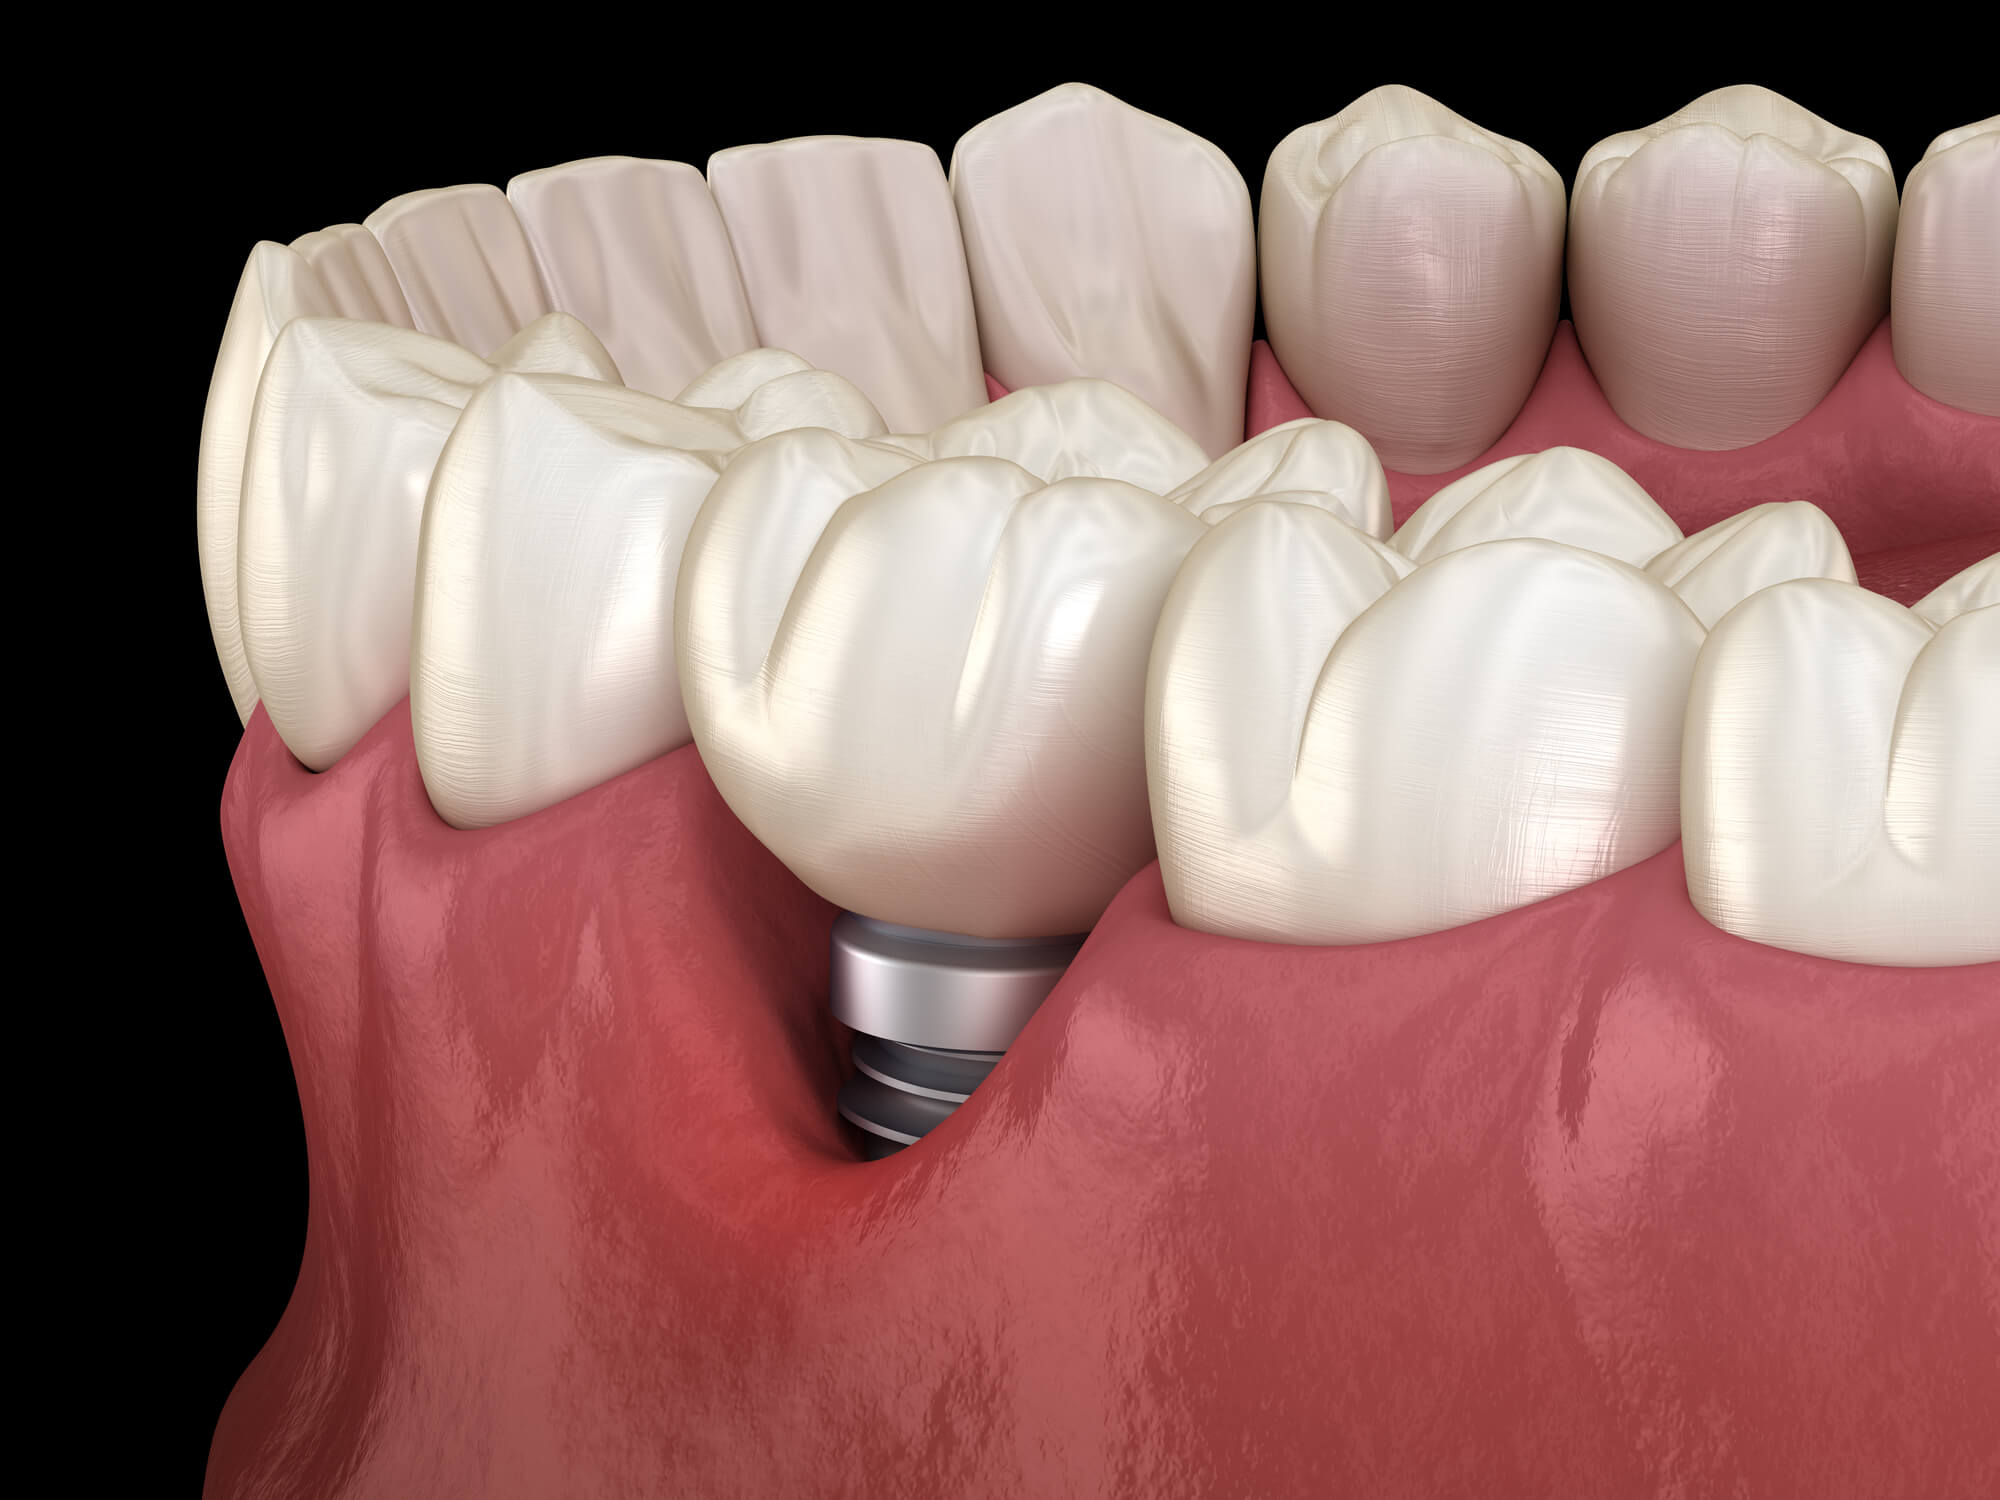 Are Dental Implants the Best Choice for Replacing Missing Teeth?